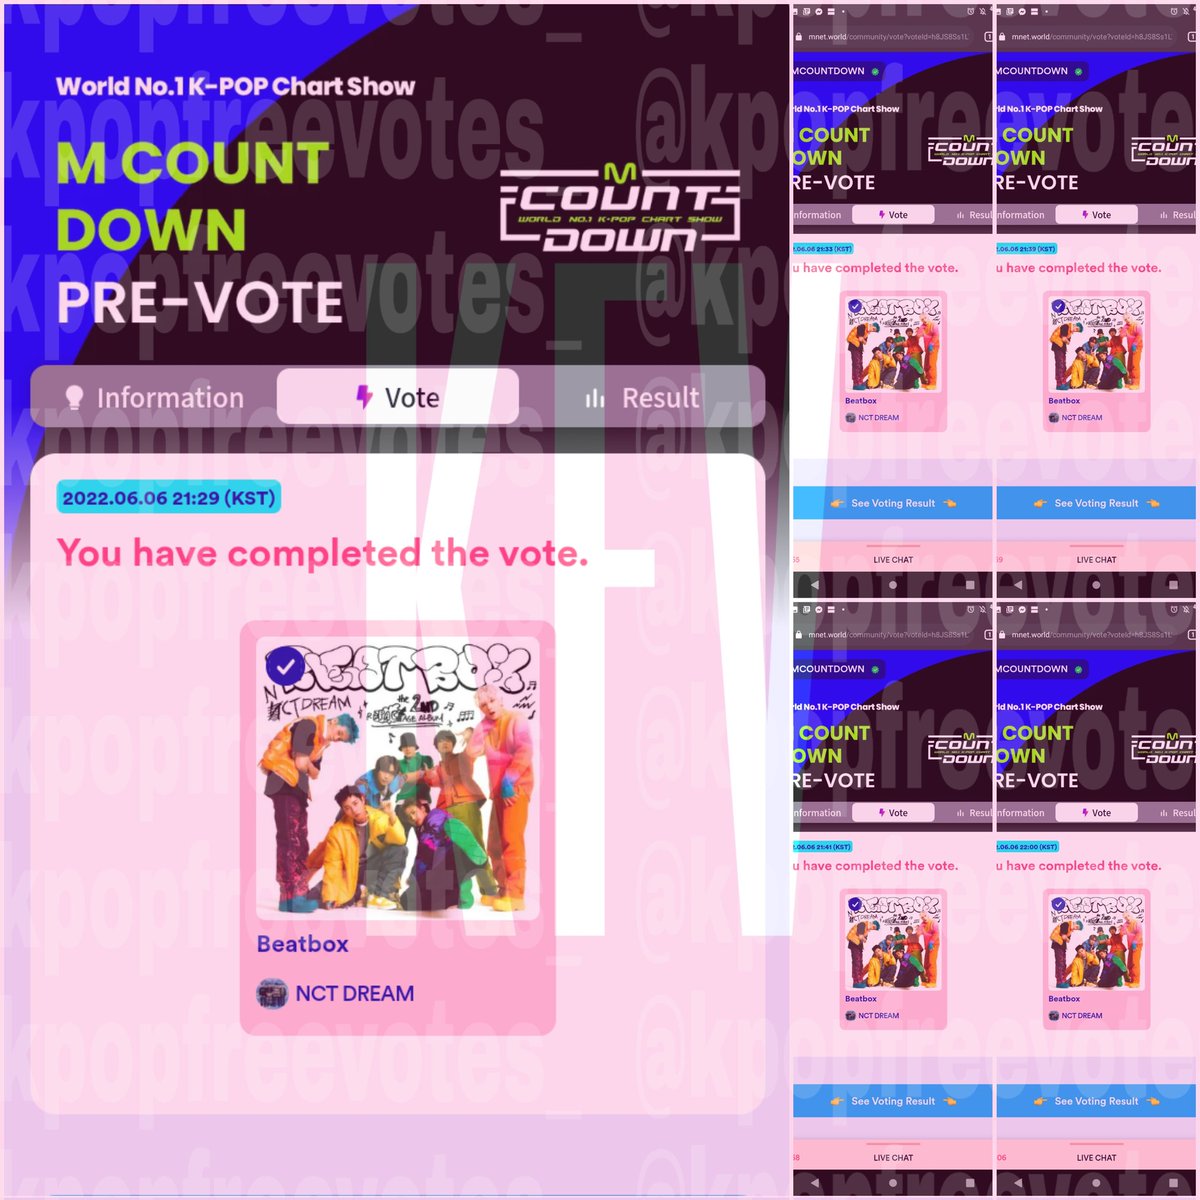 [#KFV_PROOF] 🎁5 Votes/ Mwave Accounts for #NCTDREAM 🗳️Mcountdown Thank you for everyone's participation! Goodluck!☺️❤️